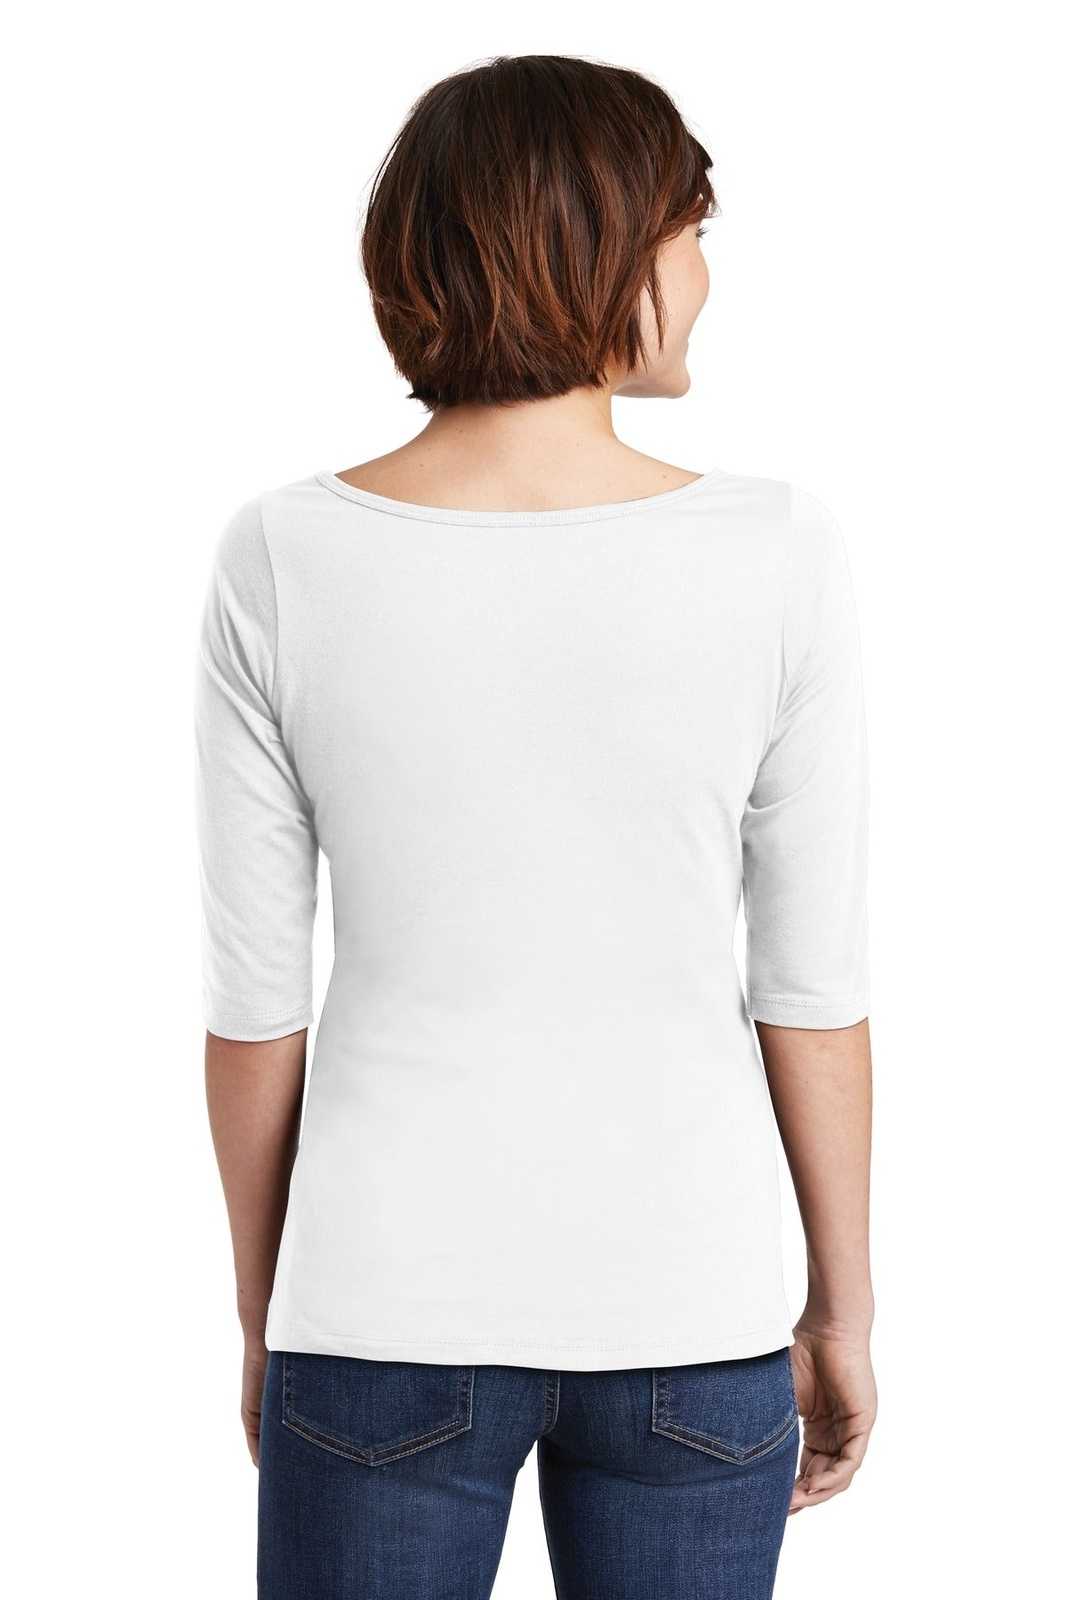 District DM107L Women's Perfect Weight 3/4-Sleeve Tee - Bright White - HIT a Double - 1